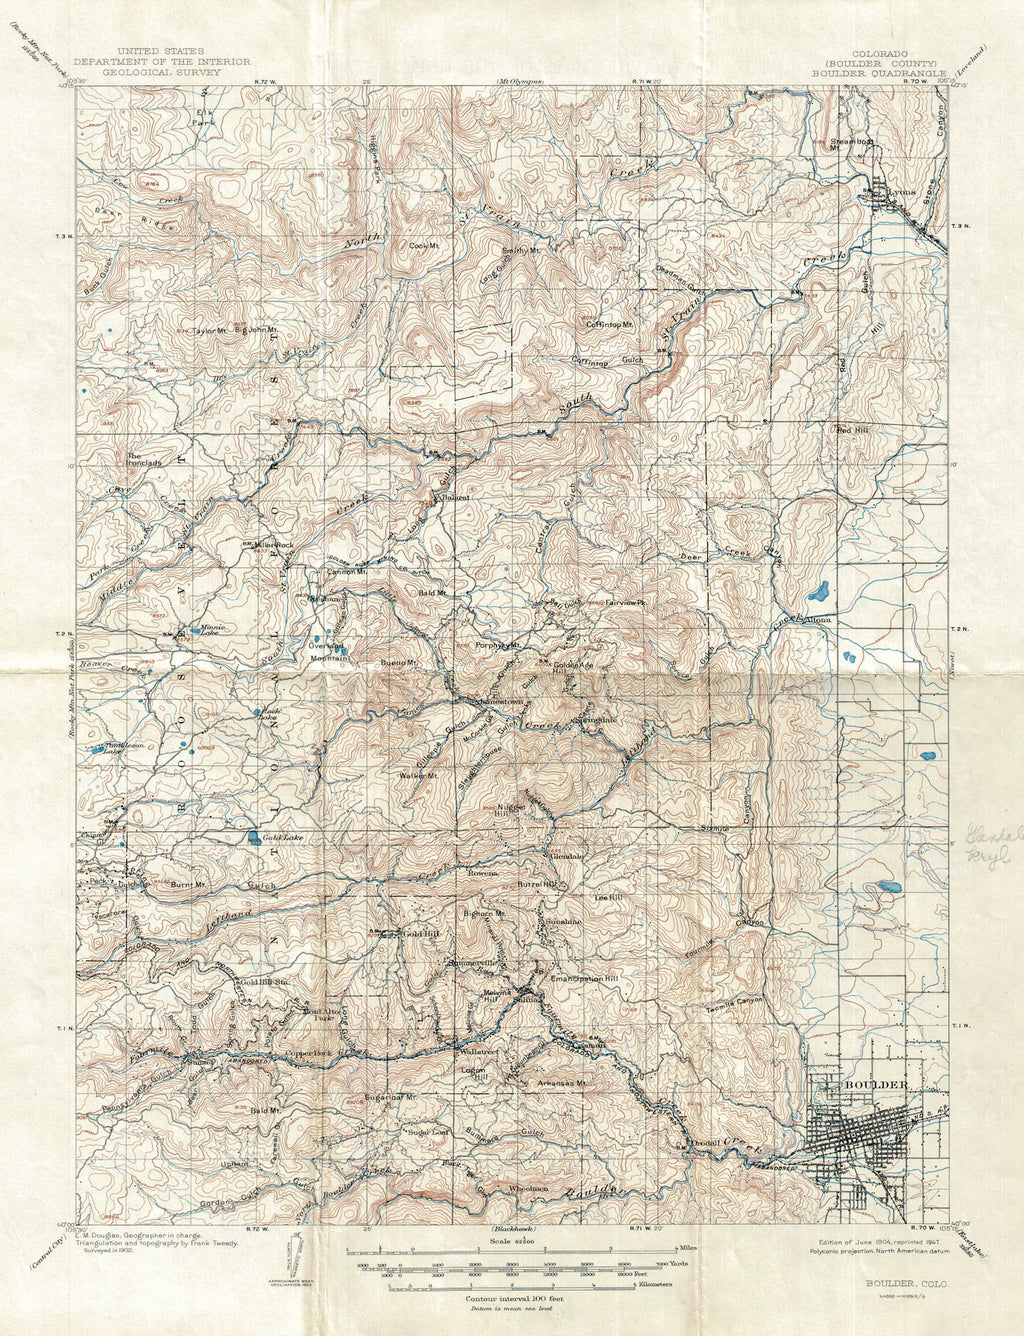 (CO. - Boulder - Lyons) Boulder Quadrangle, 1947  With a simple color scheme showing the terrain and drainages, this map is a great reference for the towns and roads of the area. Spans from Boulder and beyond Sugar Loaf, up through Gold Hill , Jamestown, St Vrain Creek and the small town of Lyons. Condition is good with some minor manuscript pencil notations. Image size is approximately 19.5 x 14 (inches)